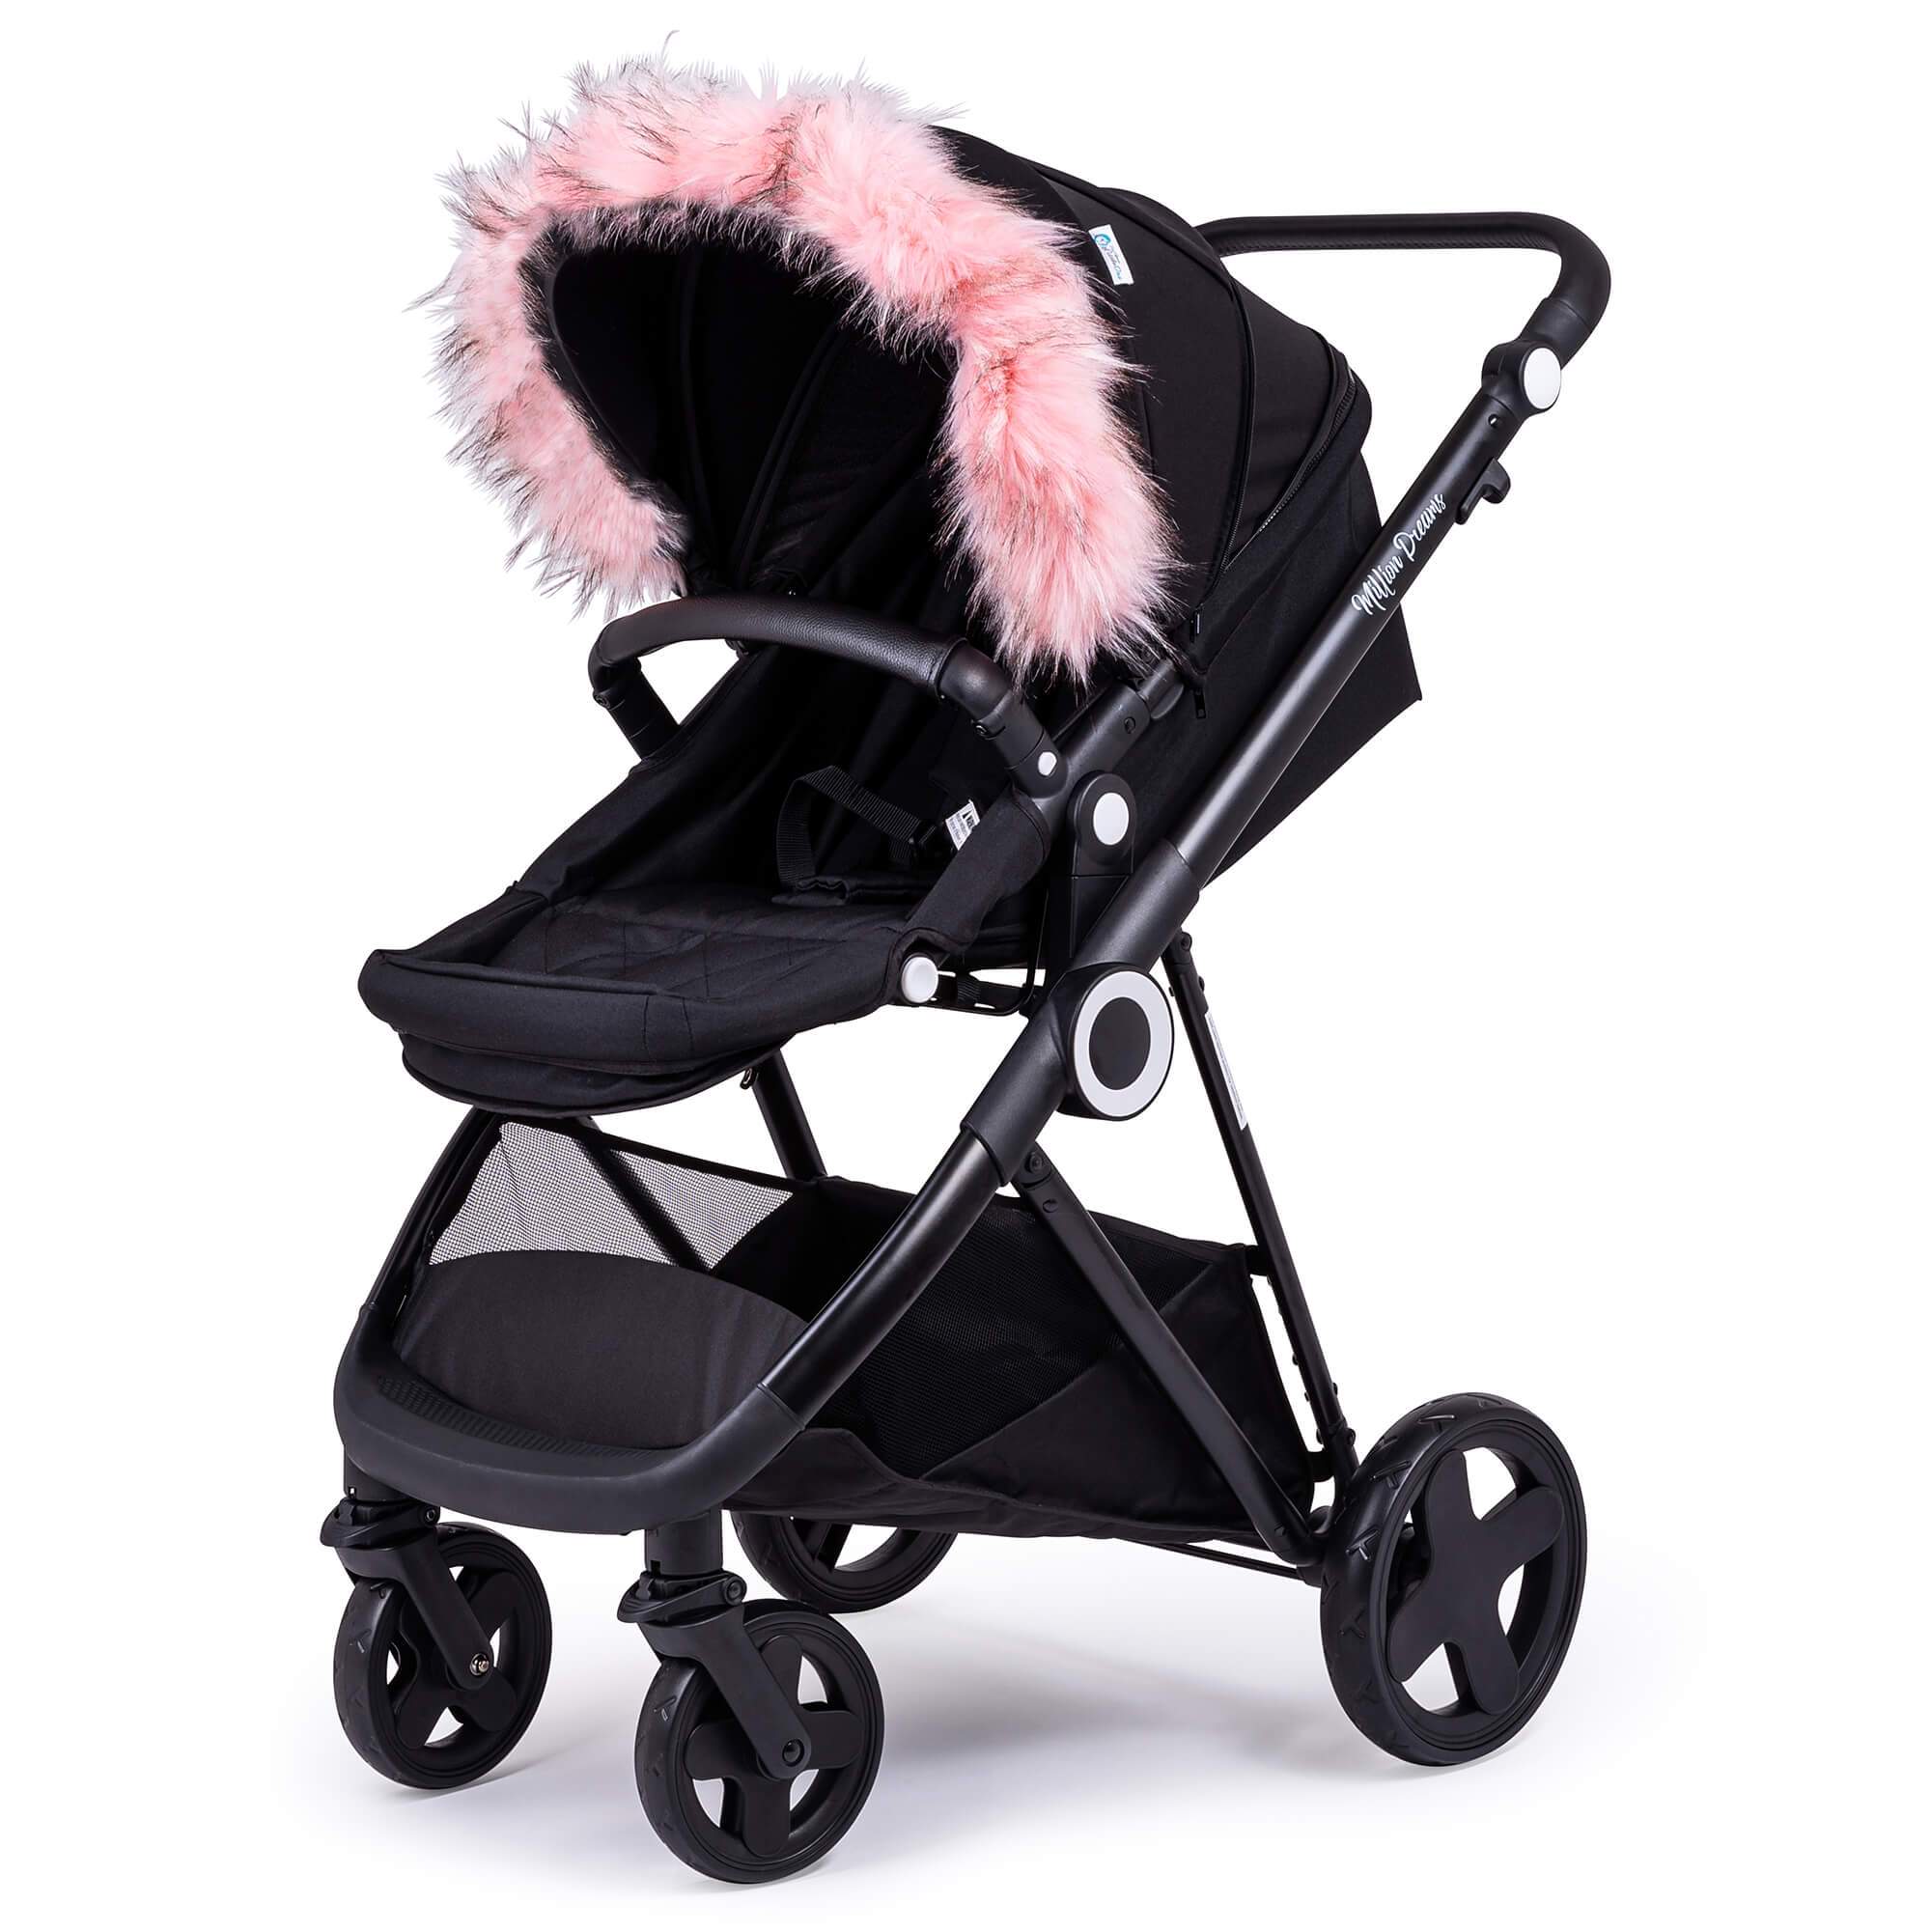 Pram Fur Hood Trim Attachment for Pushchair Compatible with NeoNato - Light Pink / Fits All Models | For Your Little One